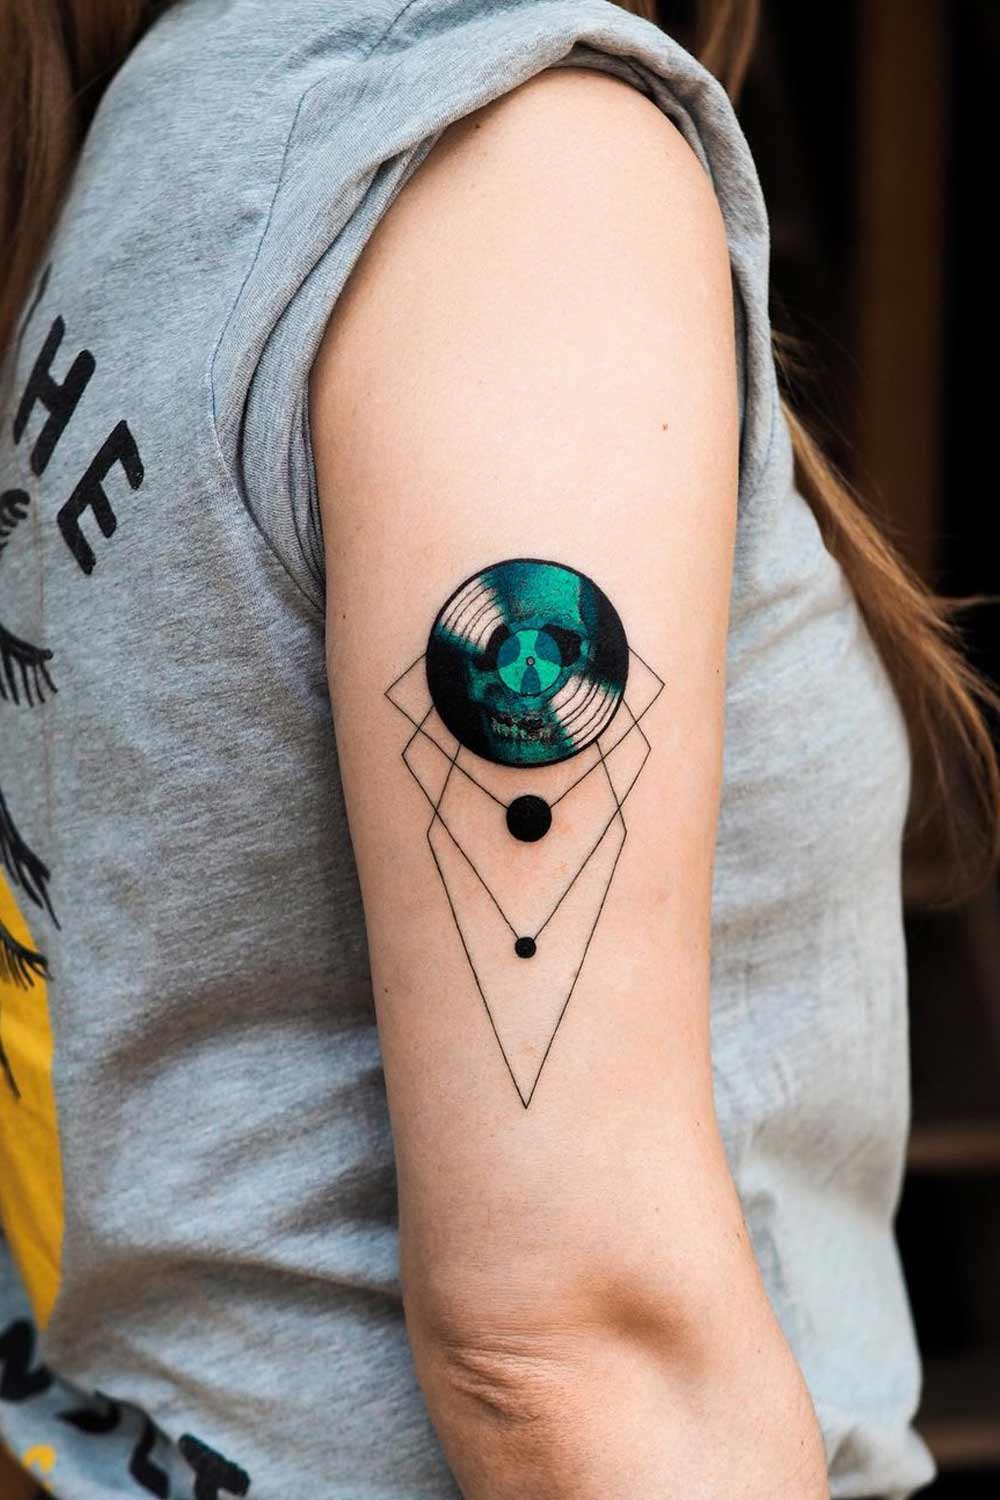 Geometric Style Tattoo with Vynil Record